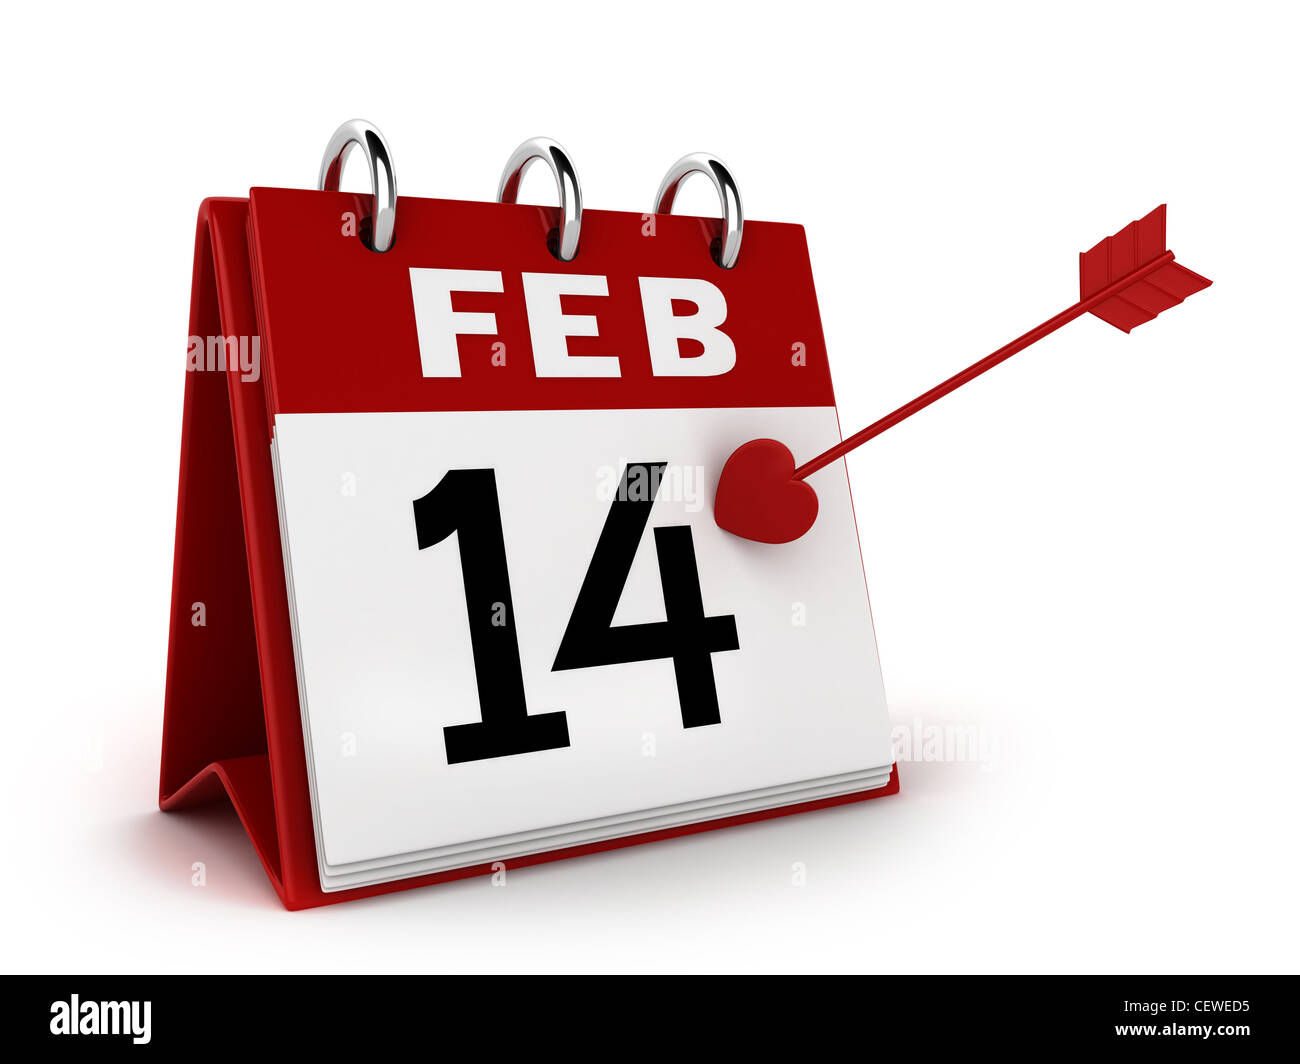 Calendar With Marked Date 3d Render Illustration Pink Organizer With Noted  With Star Day Stock Photo - Download Image Now - iStock